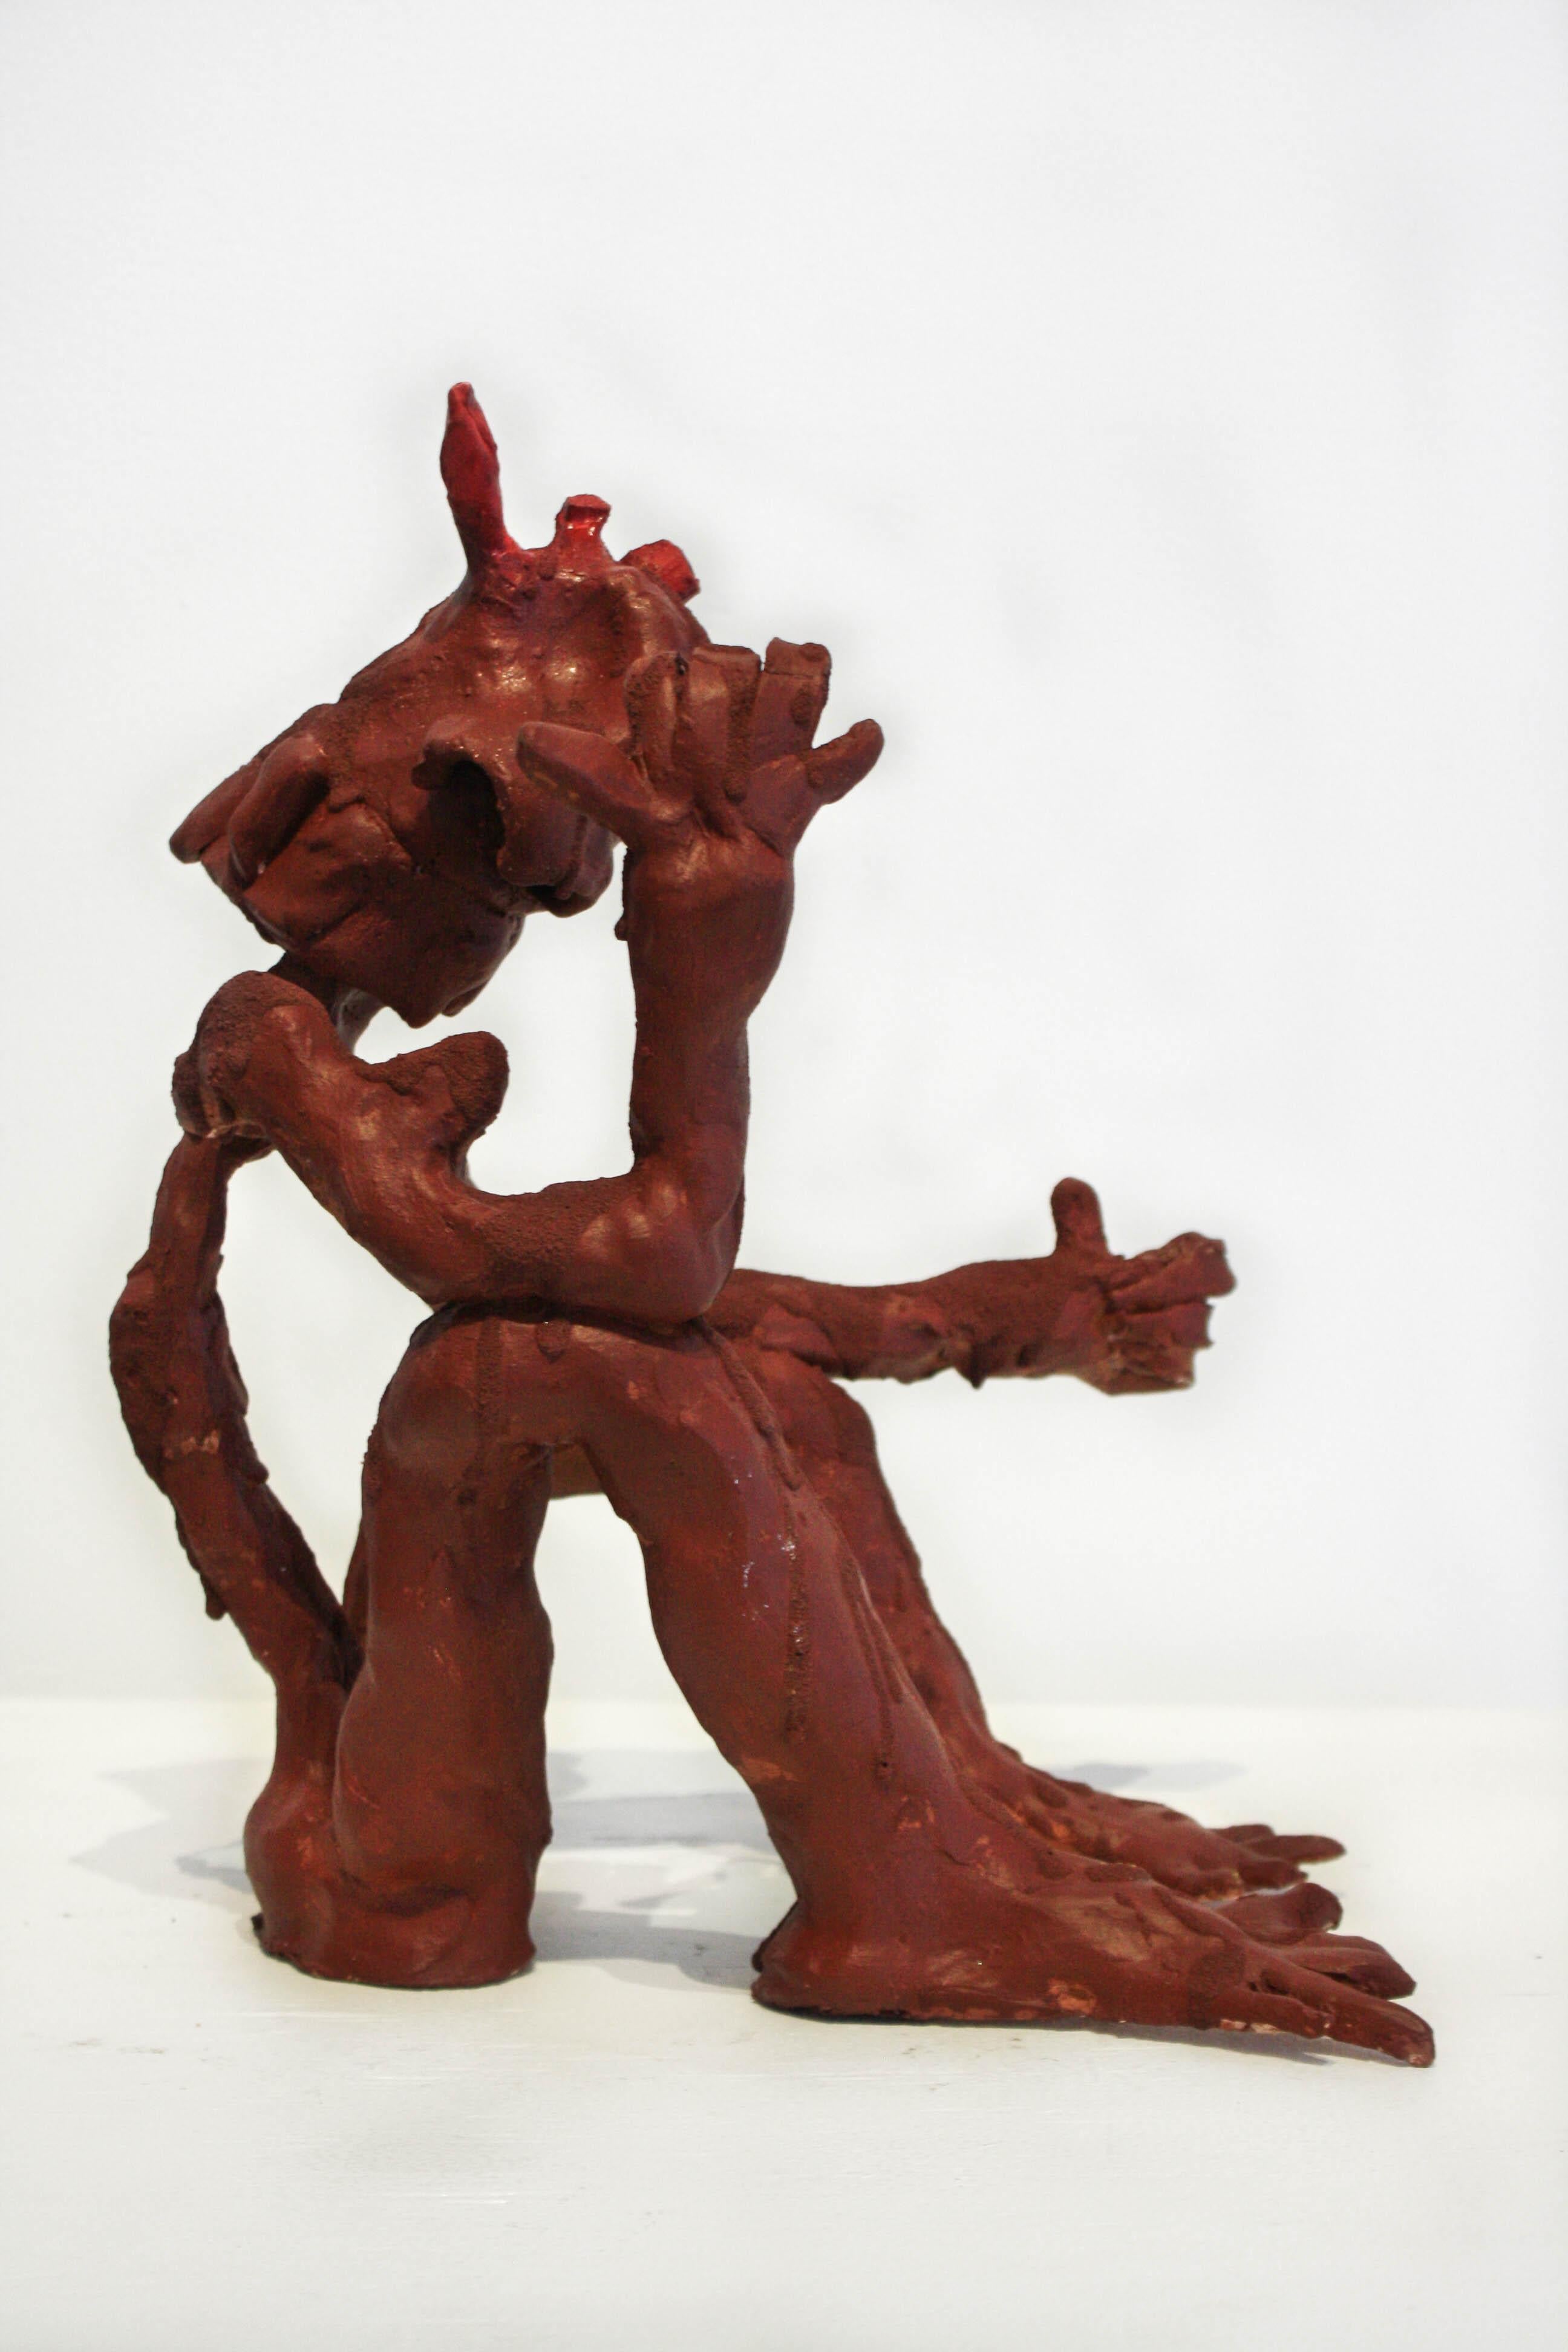 This small figurative sculpture is in a deep brown color. 

Nashville based artist, Marlos E��’van received their BFA from Watkins College of Art,Design, and Film in 2016. From street art to canvases; from performance art to film-making, E’van